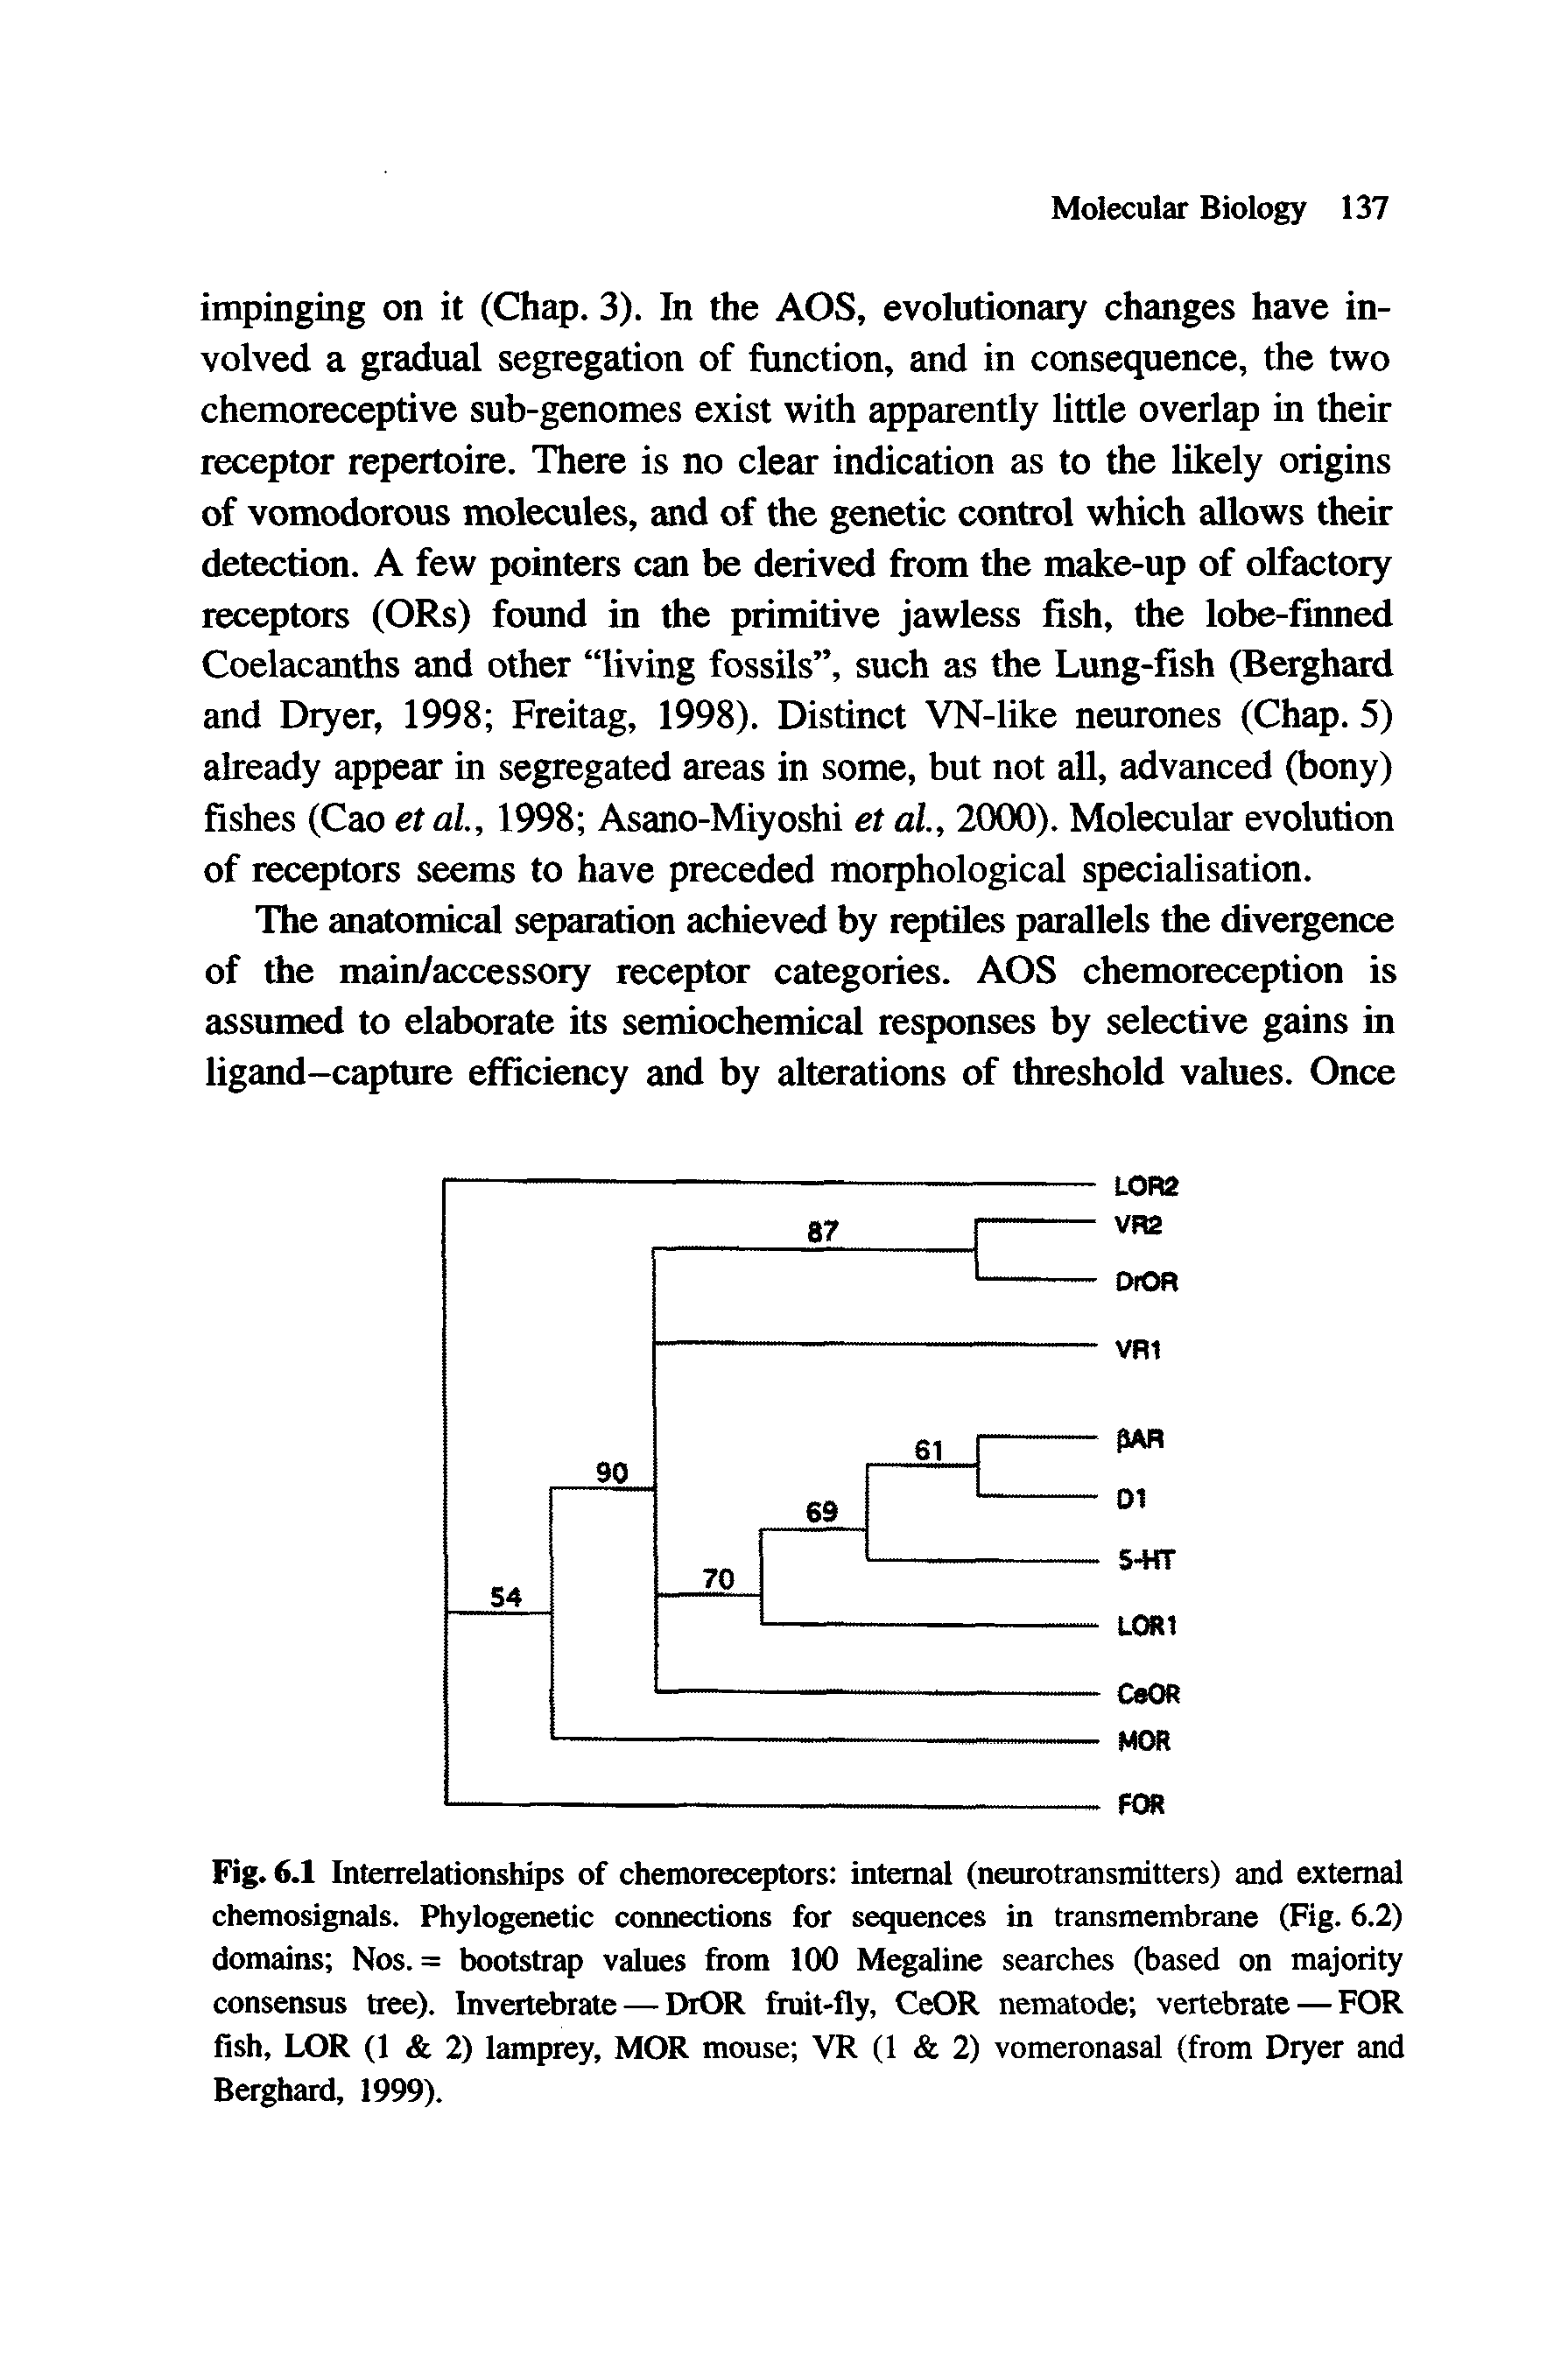 Fig. 6.1 Interrelationships of chemoreceptors internal (neurotransmitters) and external chemosignals. Phylogenetic connections for sequences in transmembrane (Fig. 6.2) domains Nos. = bootstrap values from 100 Megaline searches (based on majority consensus tree). Invertebrate — DrOR fruit-fly, CeOR nematode vertebrate — FOR fish, LOR (1 2) lamprey, MOR mouse VR (1 2) vomeronasal (from Dryer and Berghard, 1999).